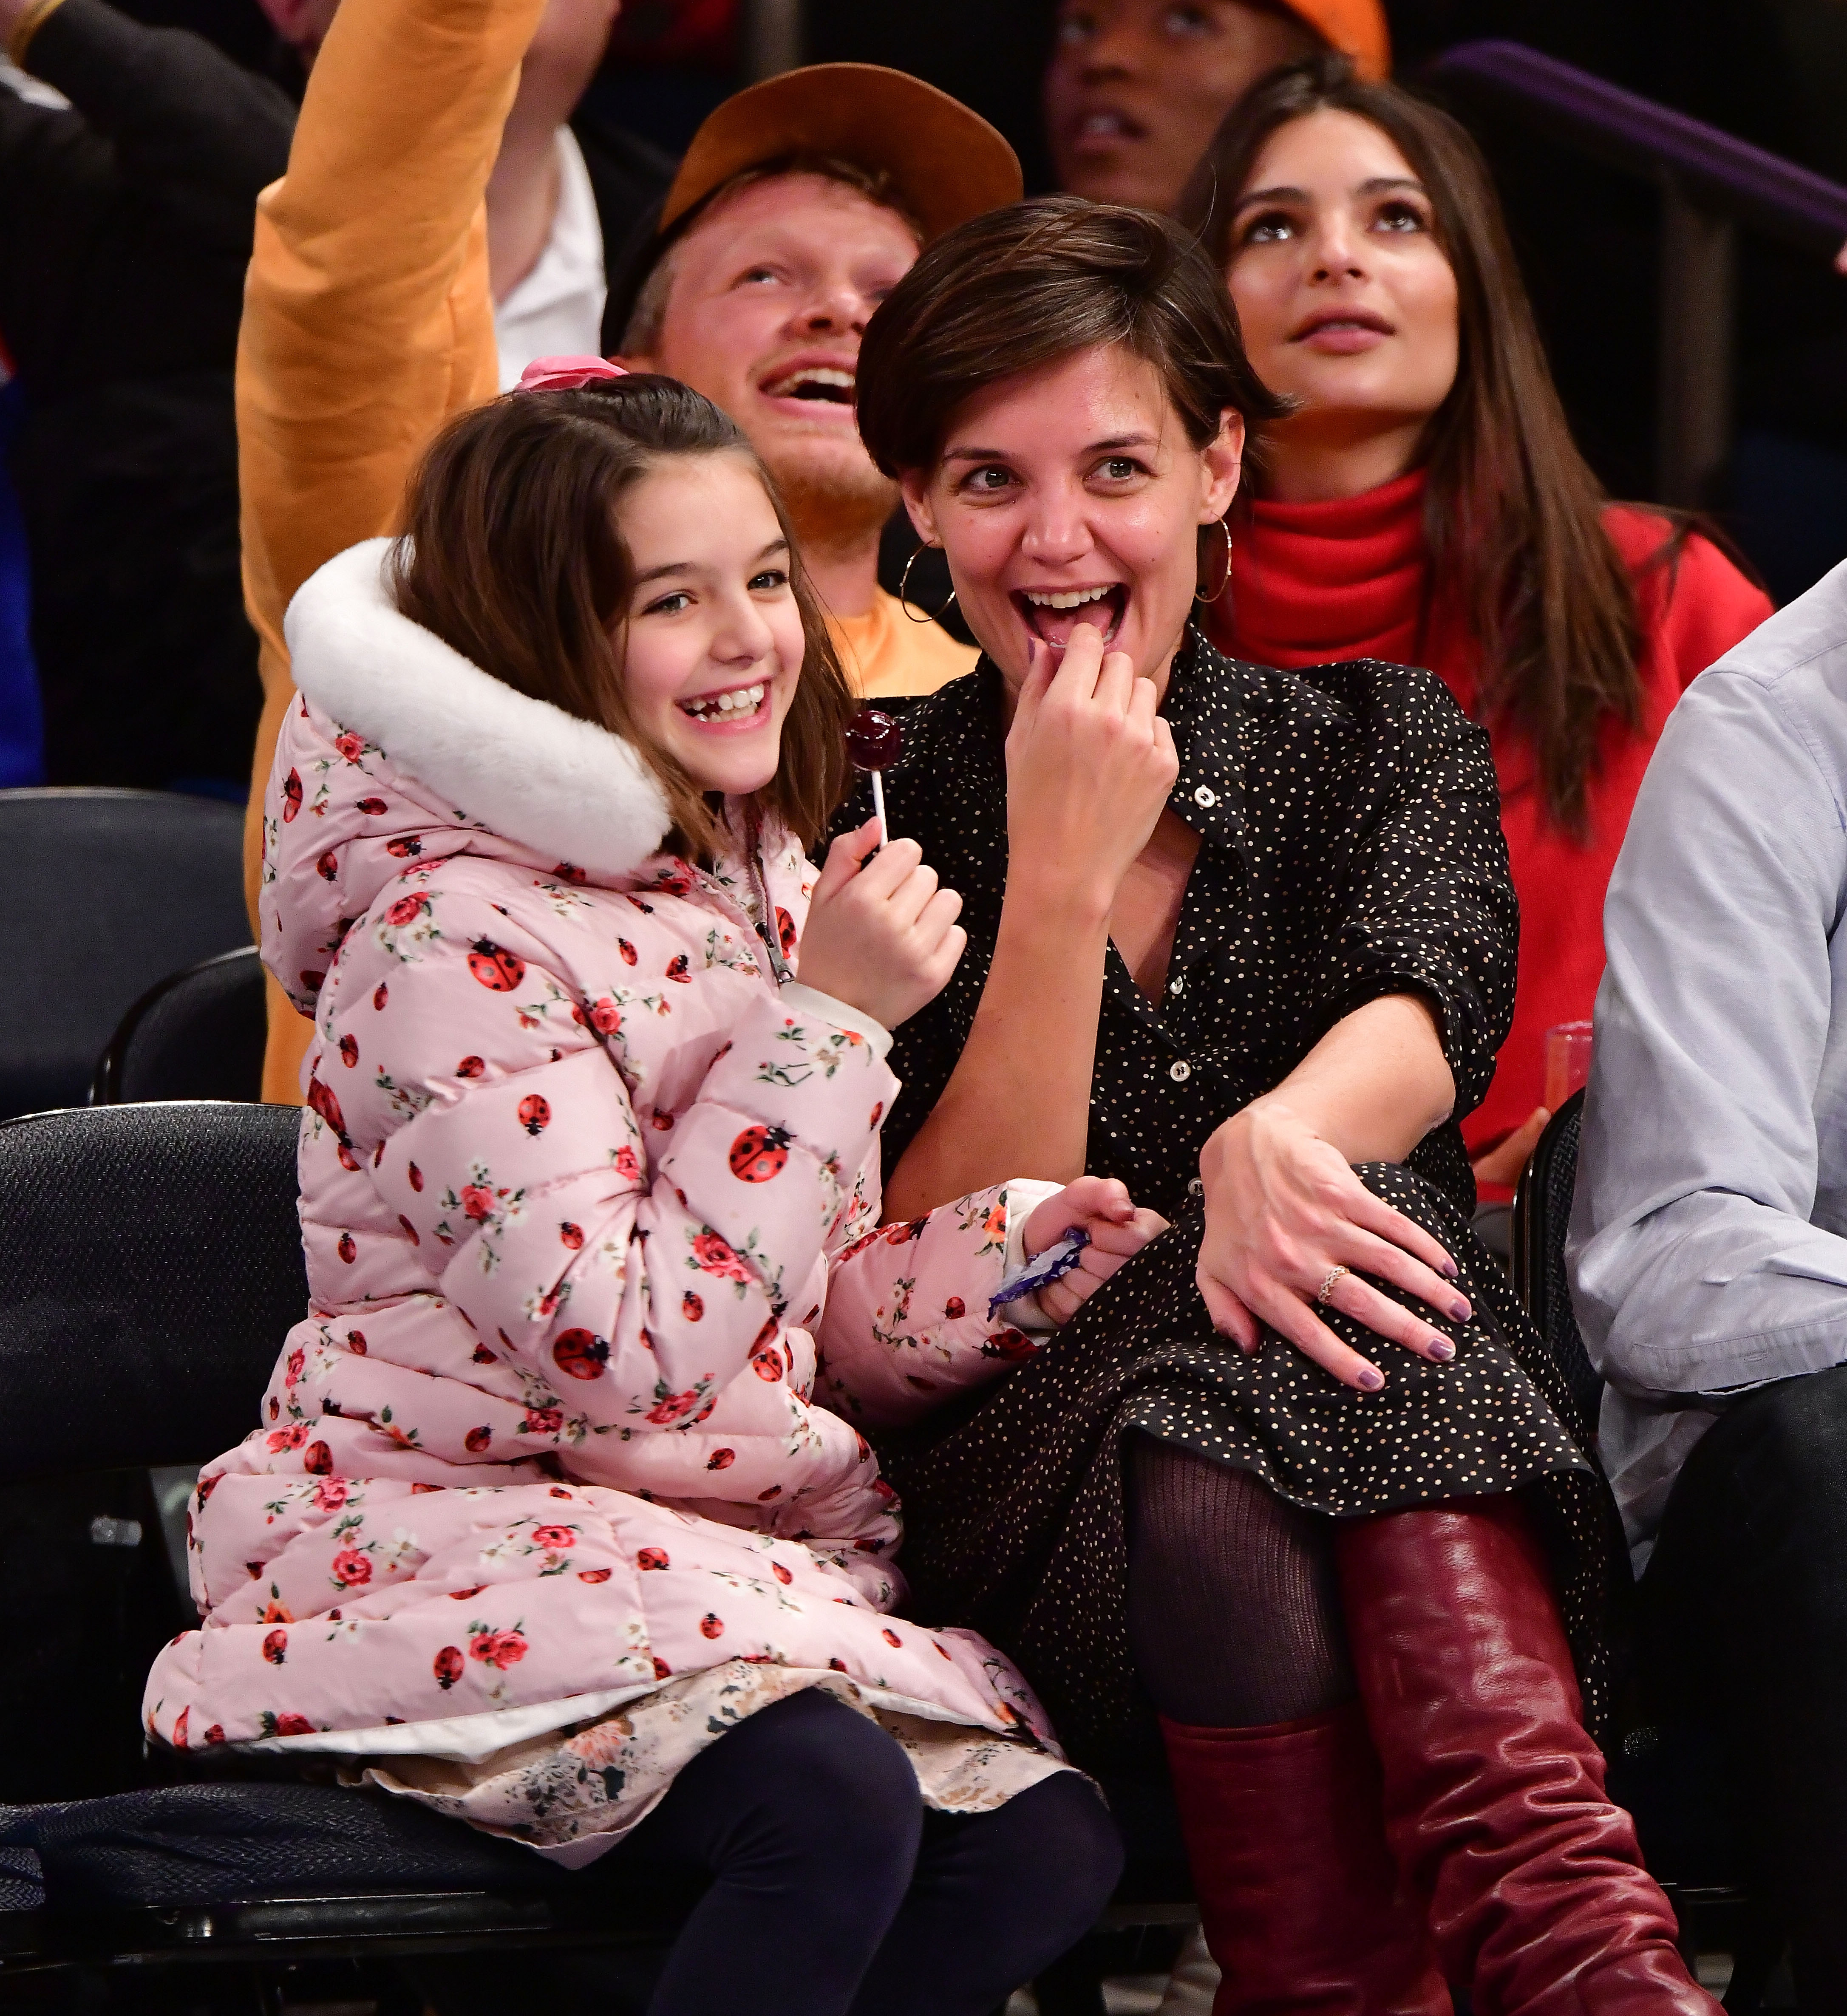 uri Cruise and Katie Holmes attend the Oklahoma City Thunder Vs New York Knicks game at Madison Square Garden on December 16, 2017 in New York City. | Source: Getty Images